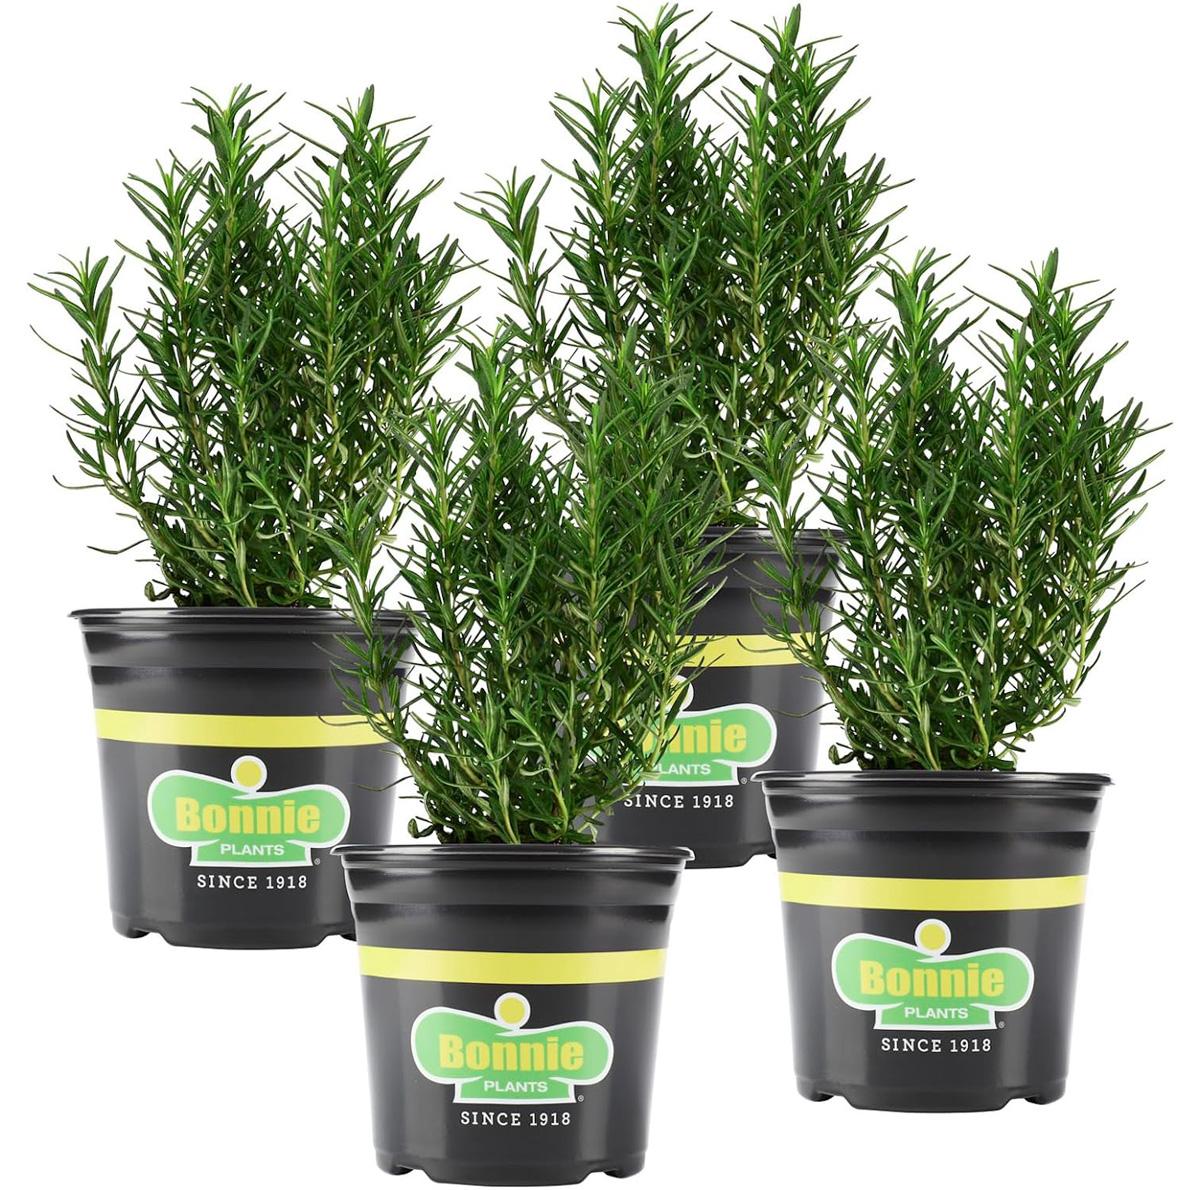 Bonnie Plants Rosemary Live Edible Aromatic Herb Plant 4 Pack for $14.65